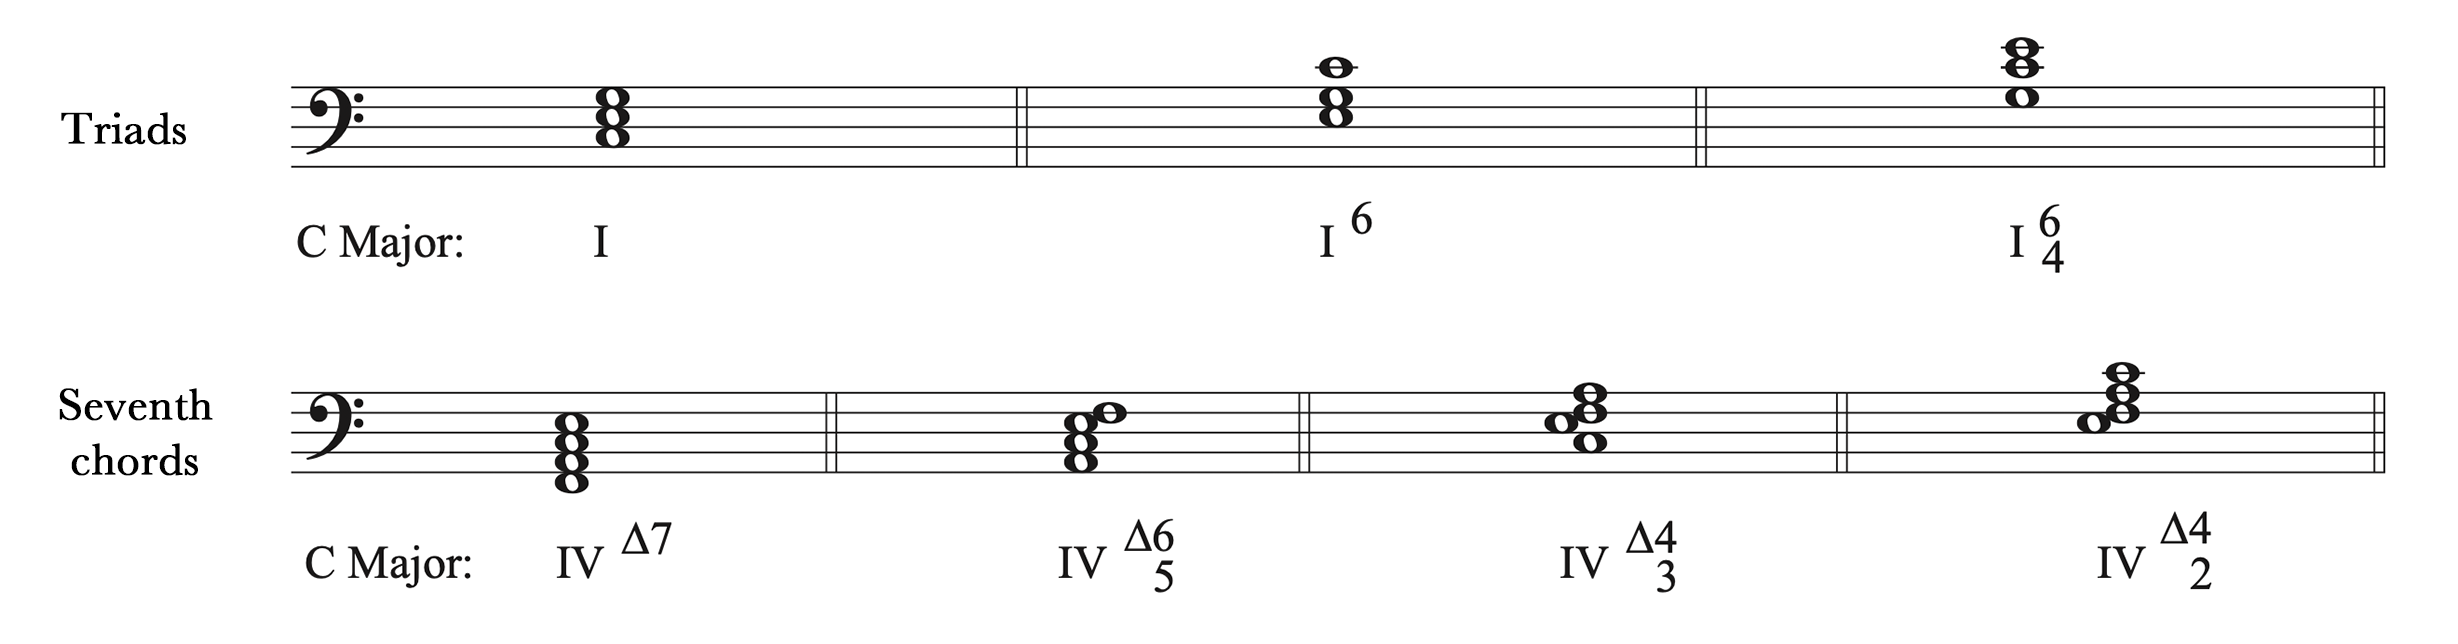 A chart showing Roman Numeral labels for triads and seventh chords in inversions.